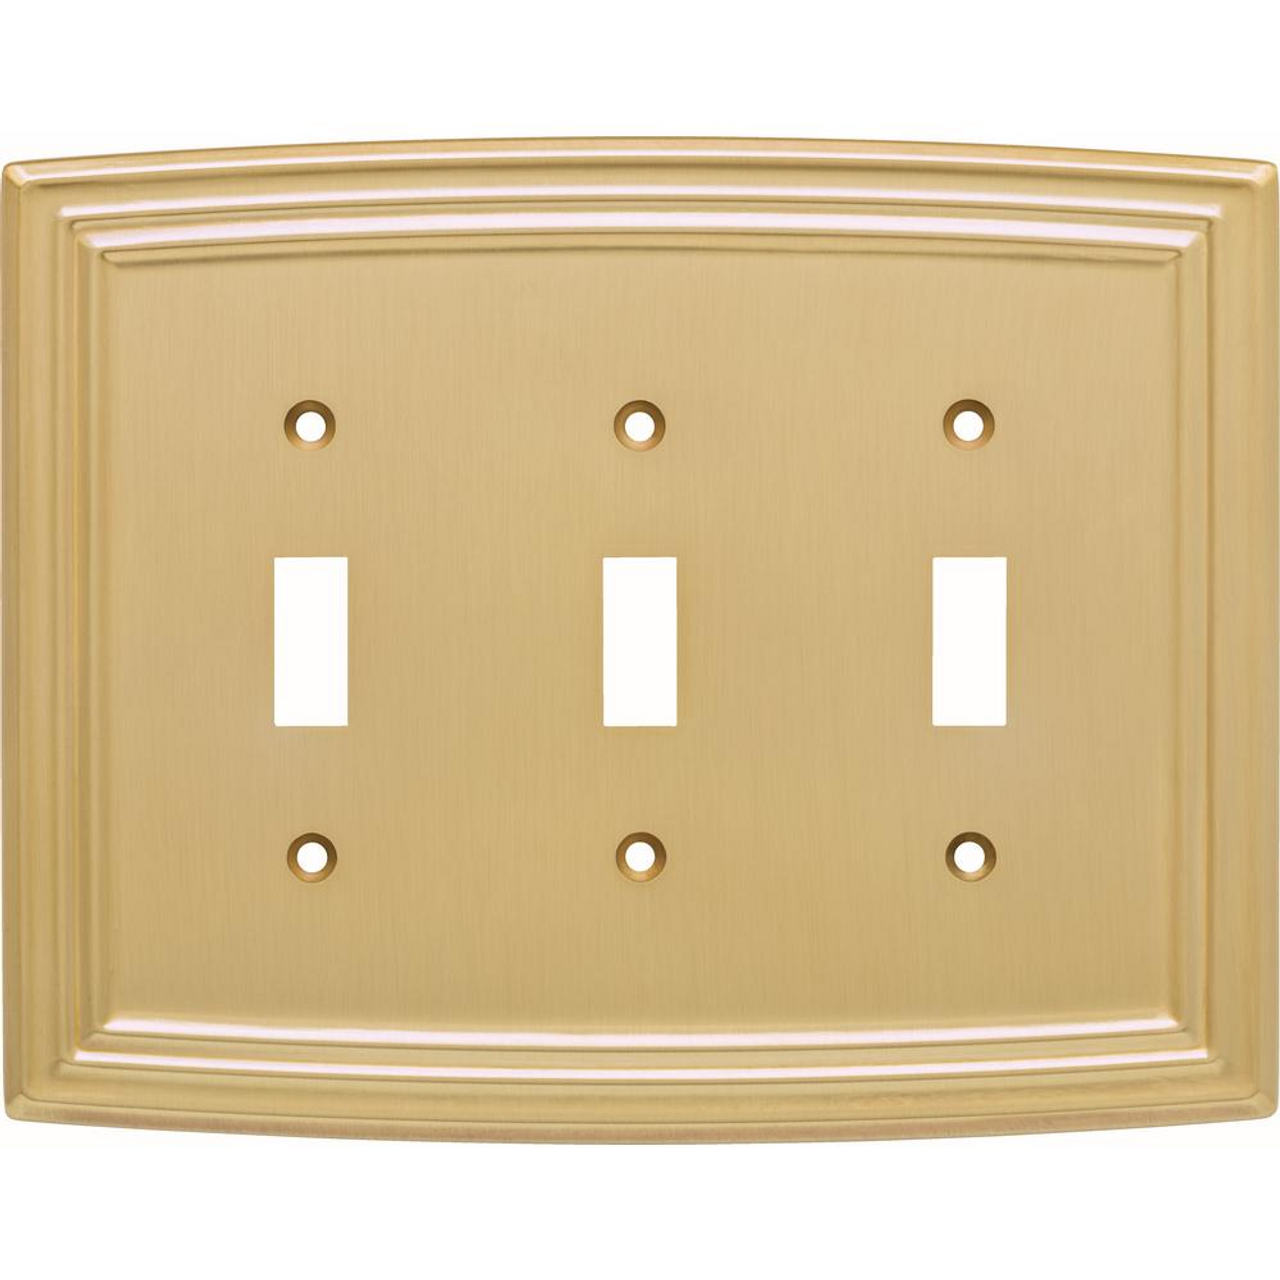 Hampton Bay W36404-117 Classical Emery Triple Switch Brushed Brass Cover Plate